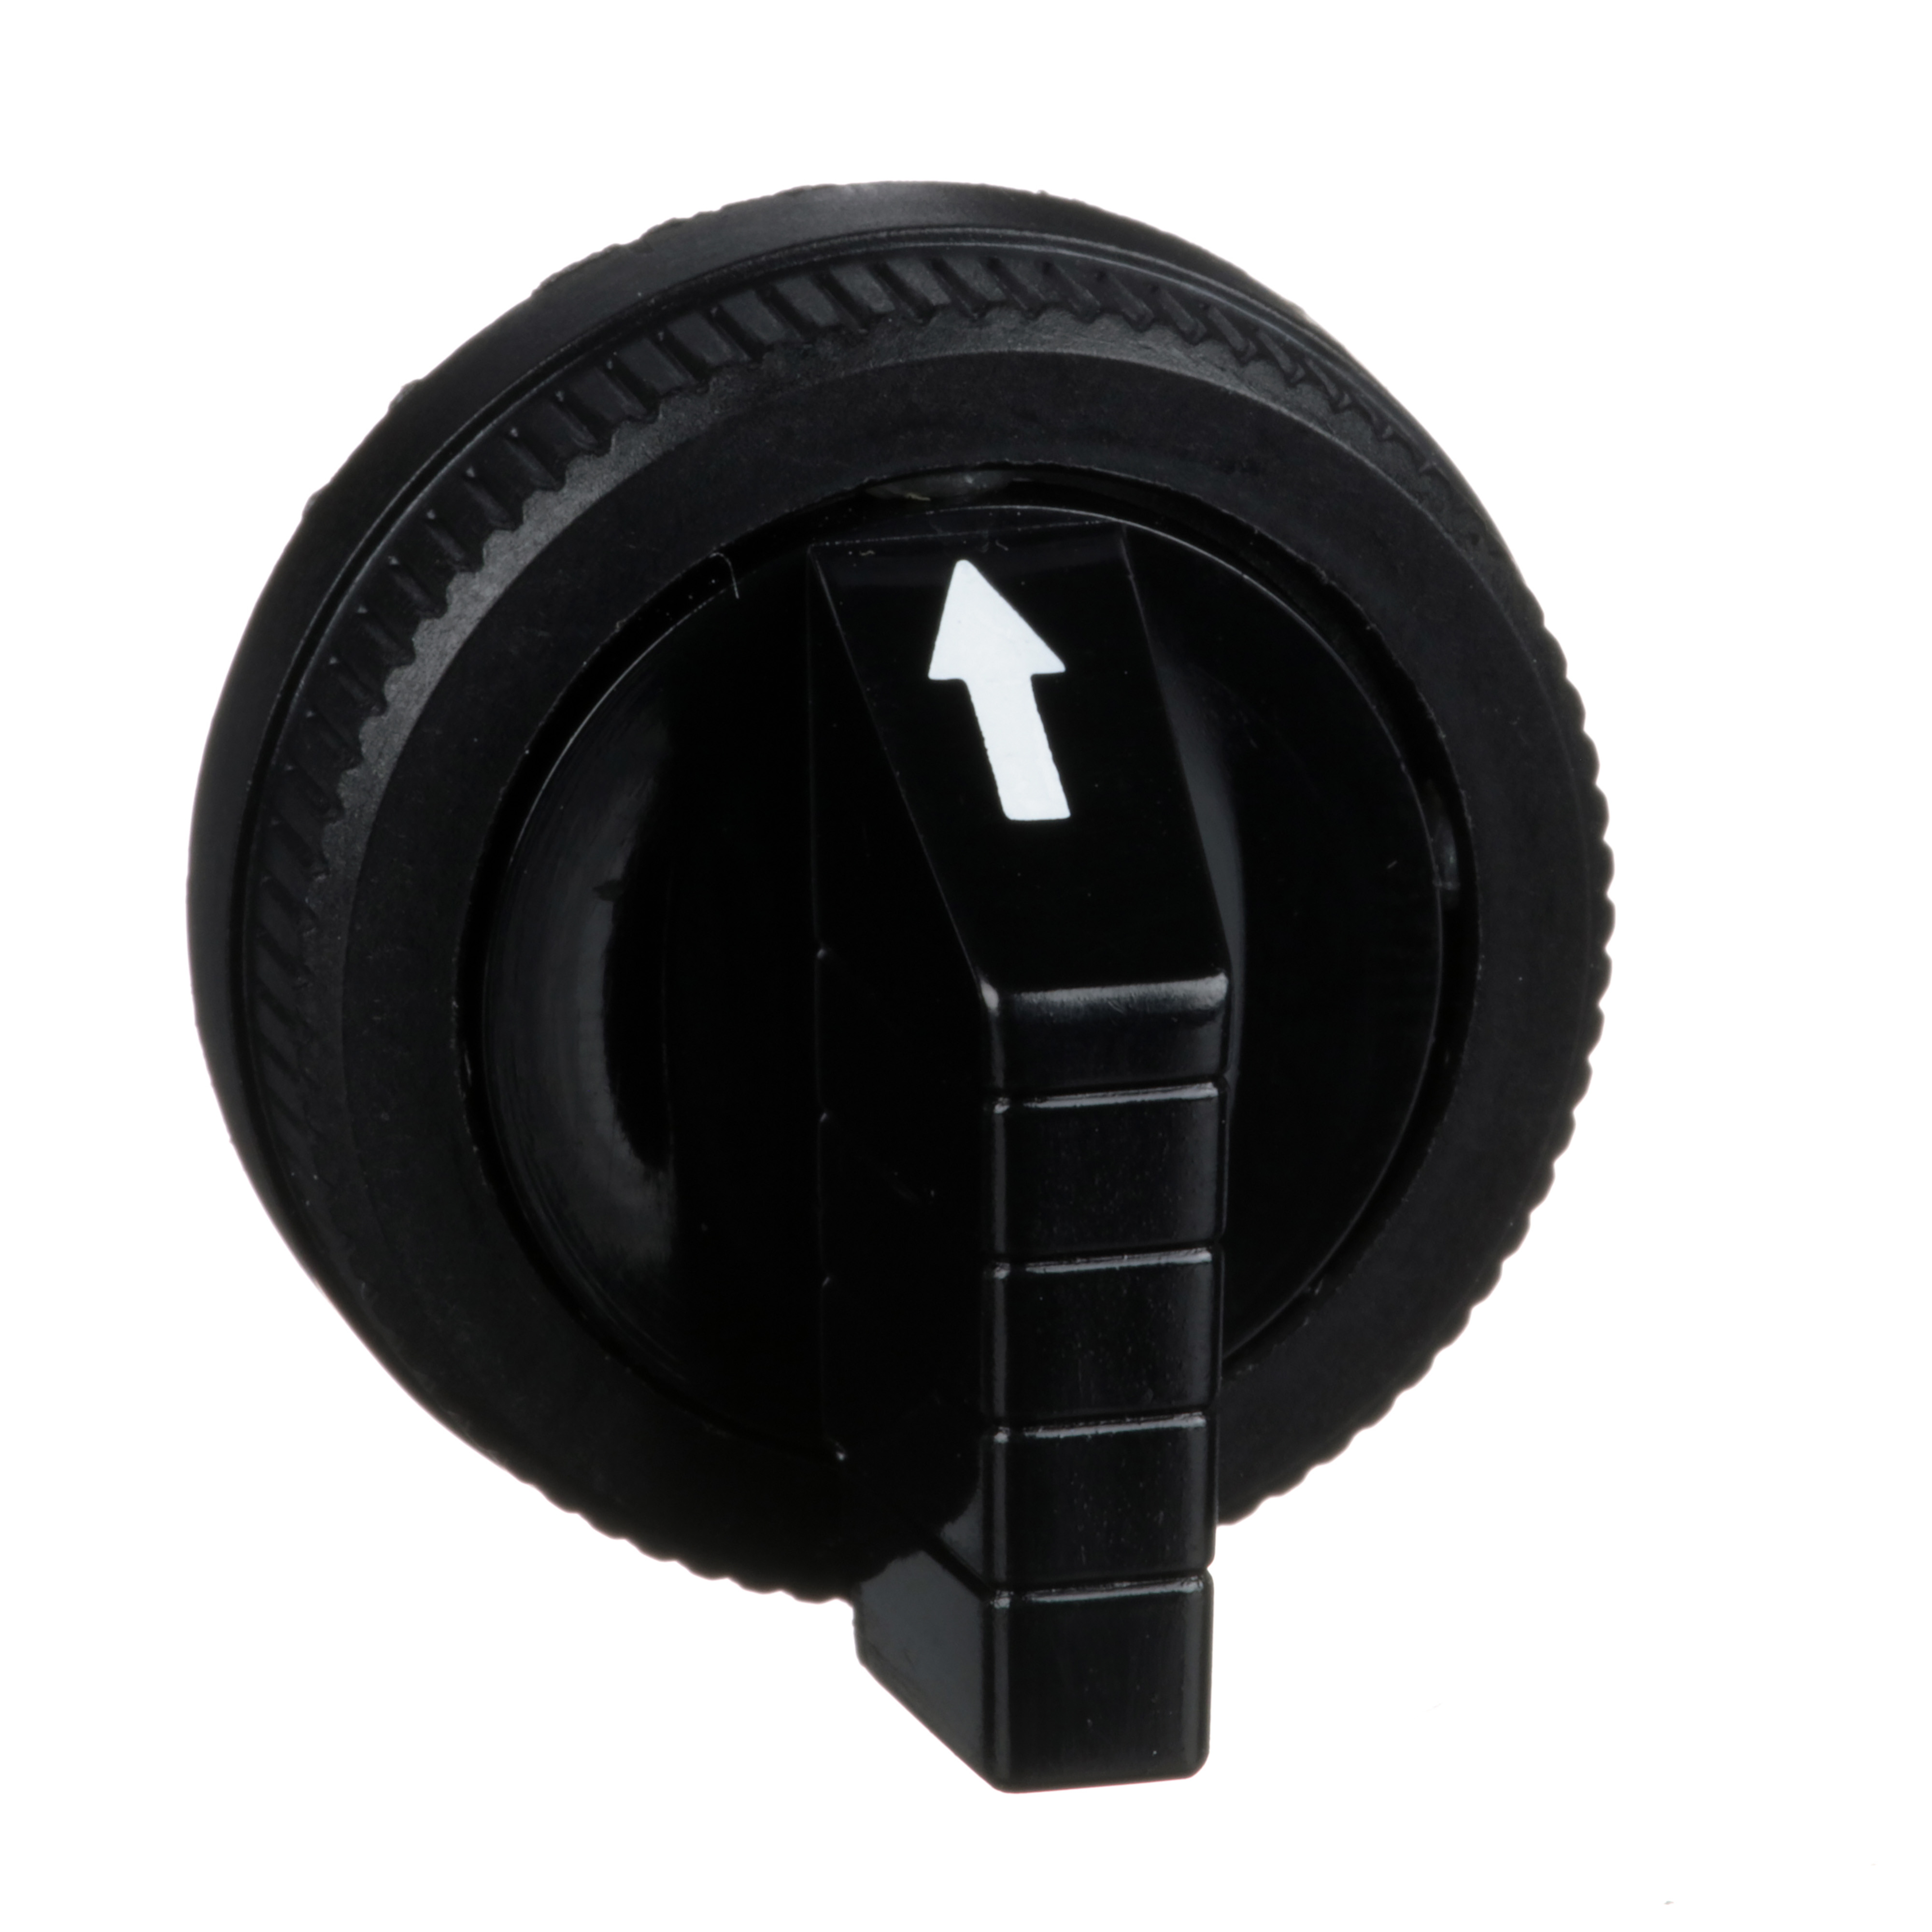 Square D™ Harmony™ 9001B11 Short Handle Selector Switch Knob, For Use With 30 mm Selector Switch, -25 to 70 deg C Operating Temperature, NEMA 3/4/4X/12/13 Enclosure, Standard Knob Actuator, Black